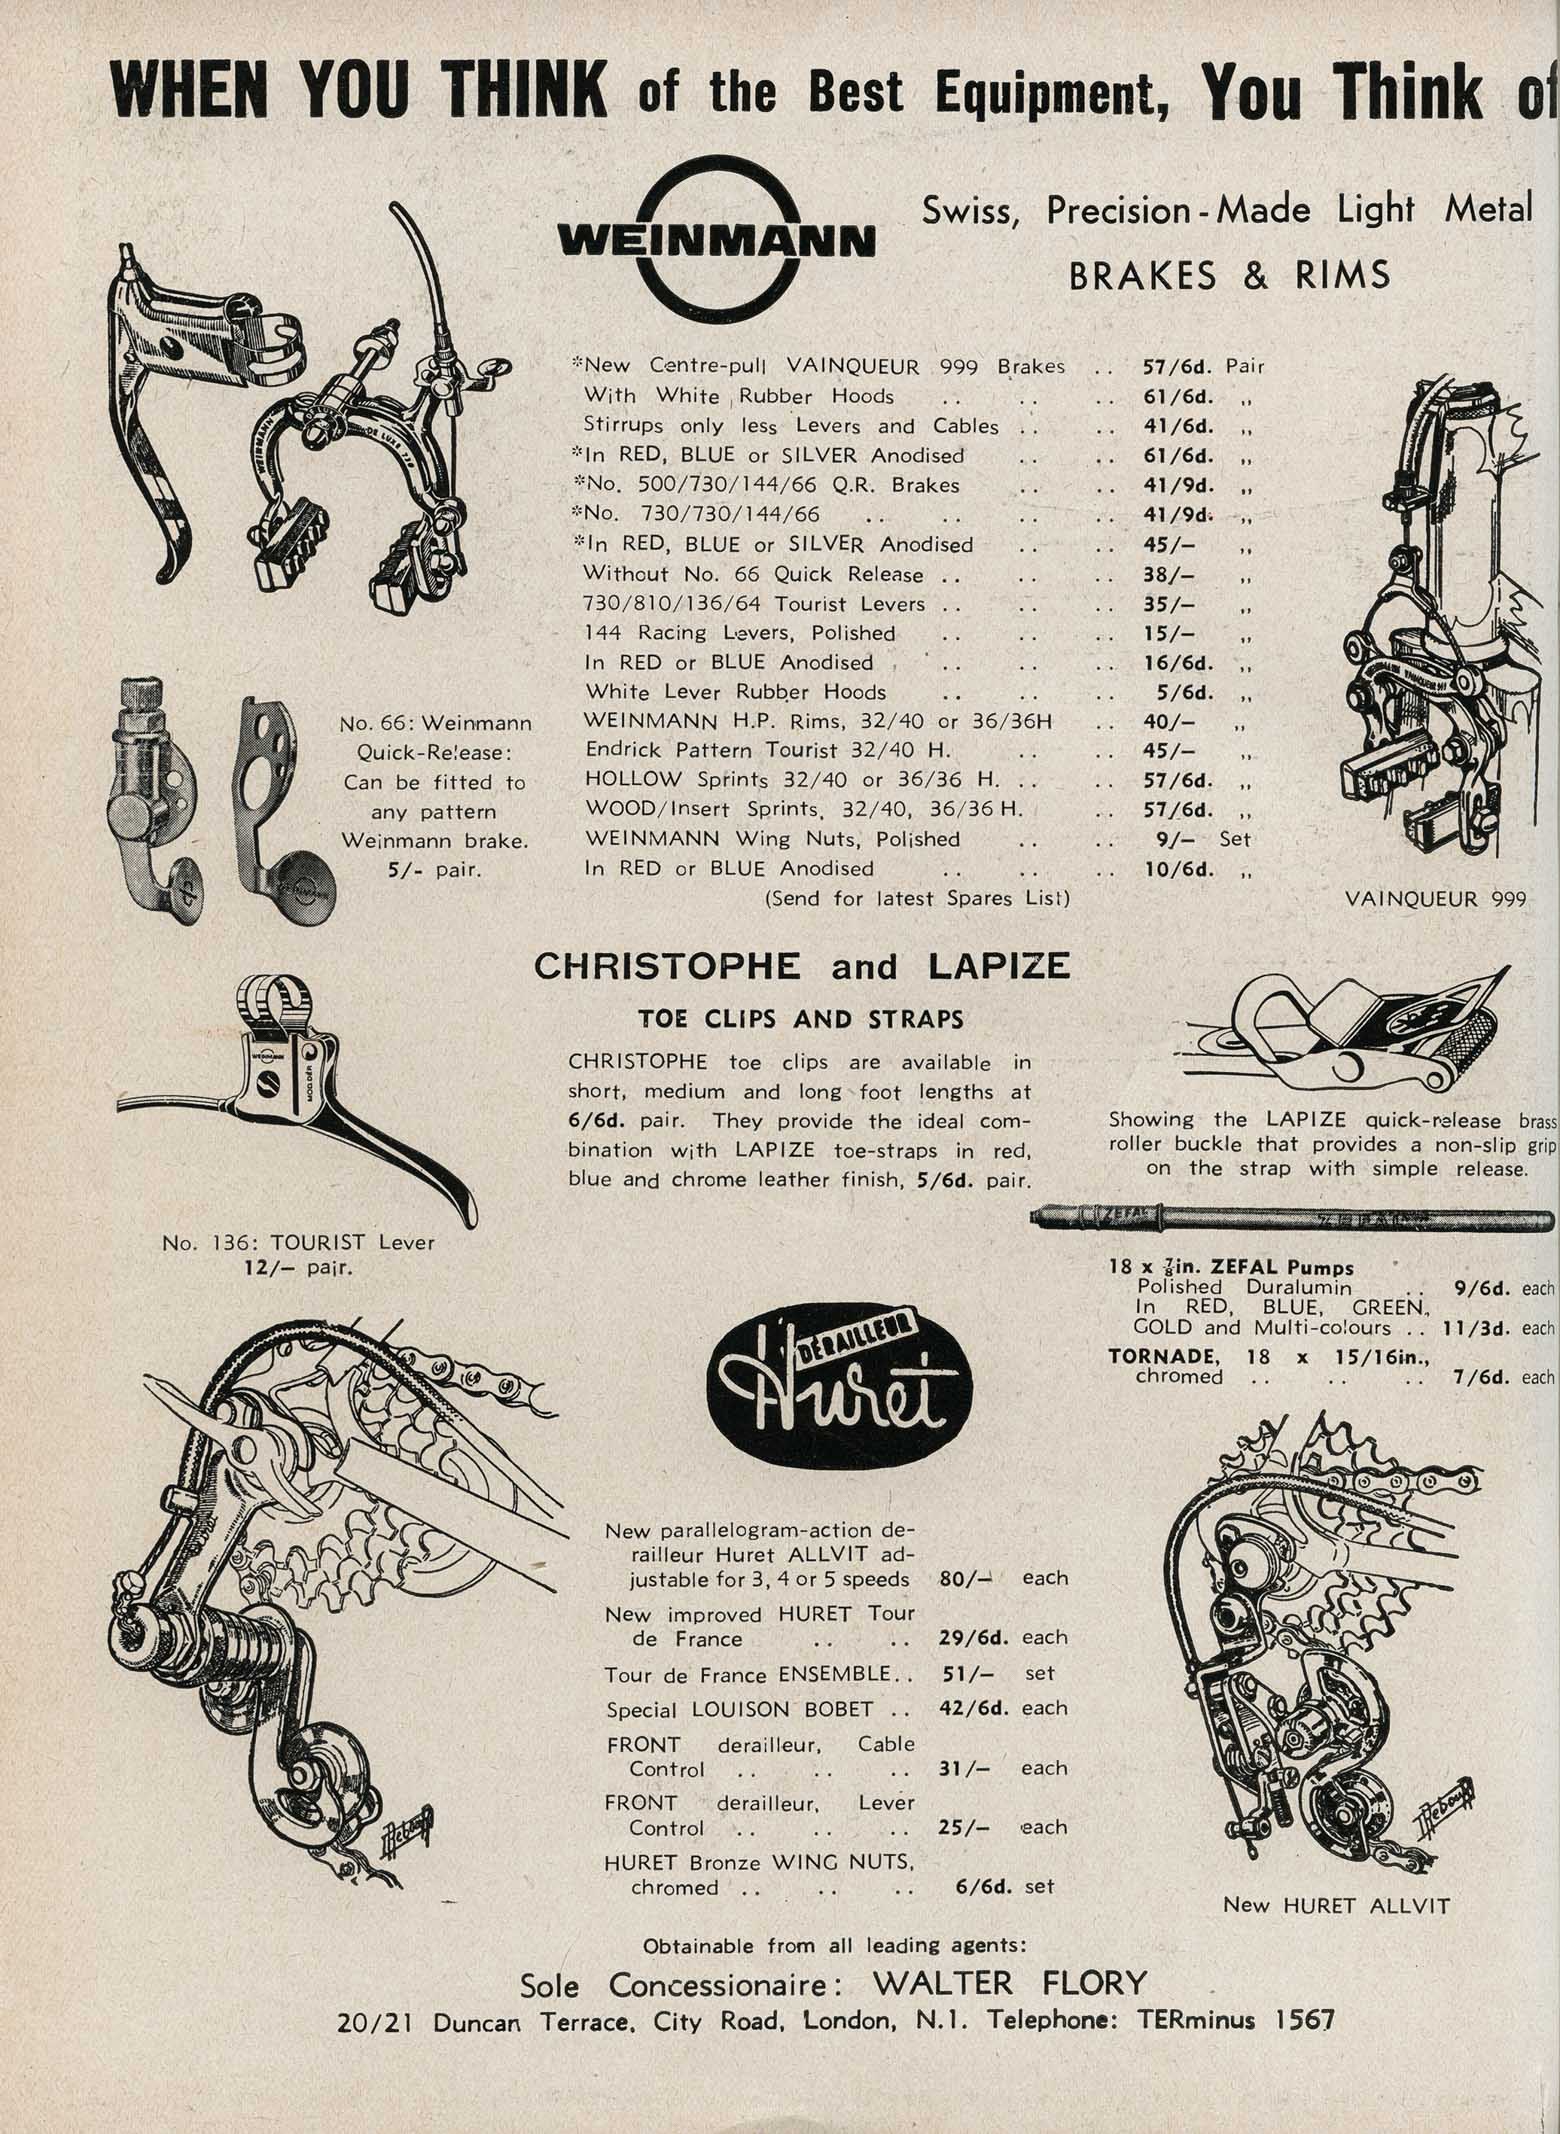 Sporting Cyclist April 1959 Walter Flory advert main image